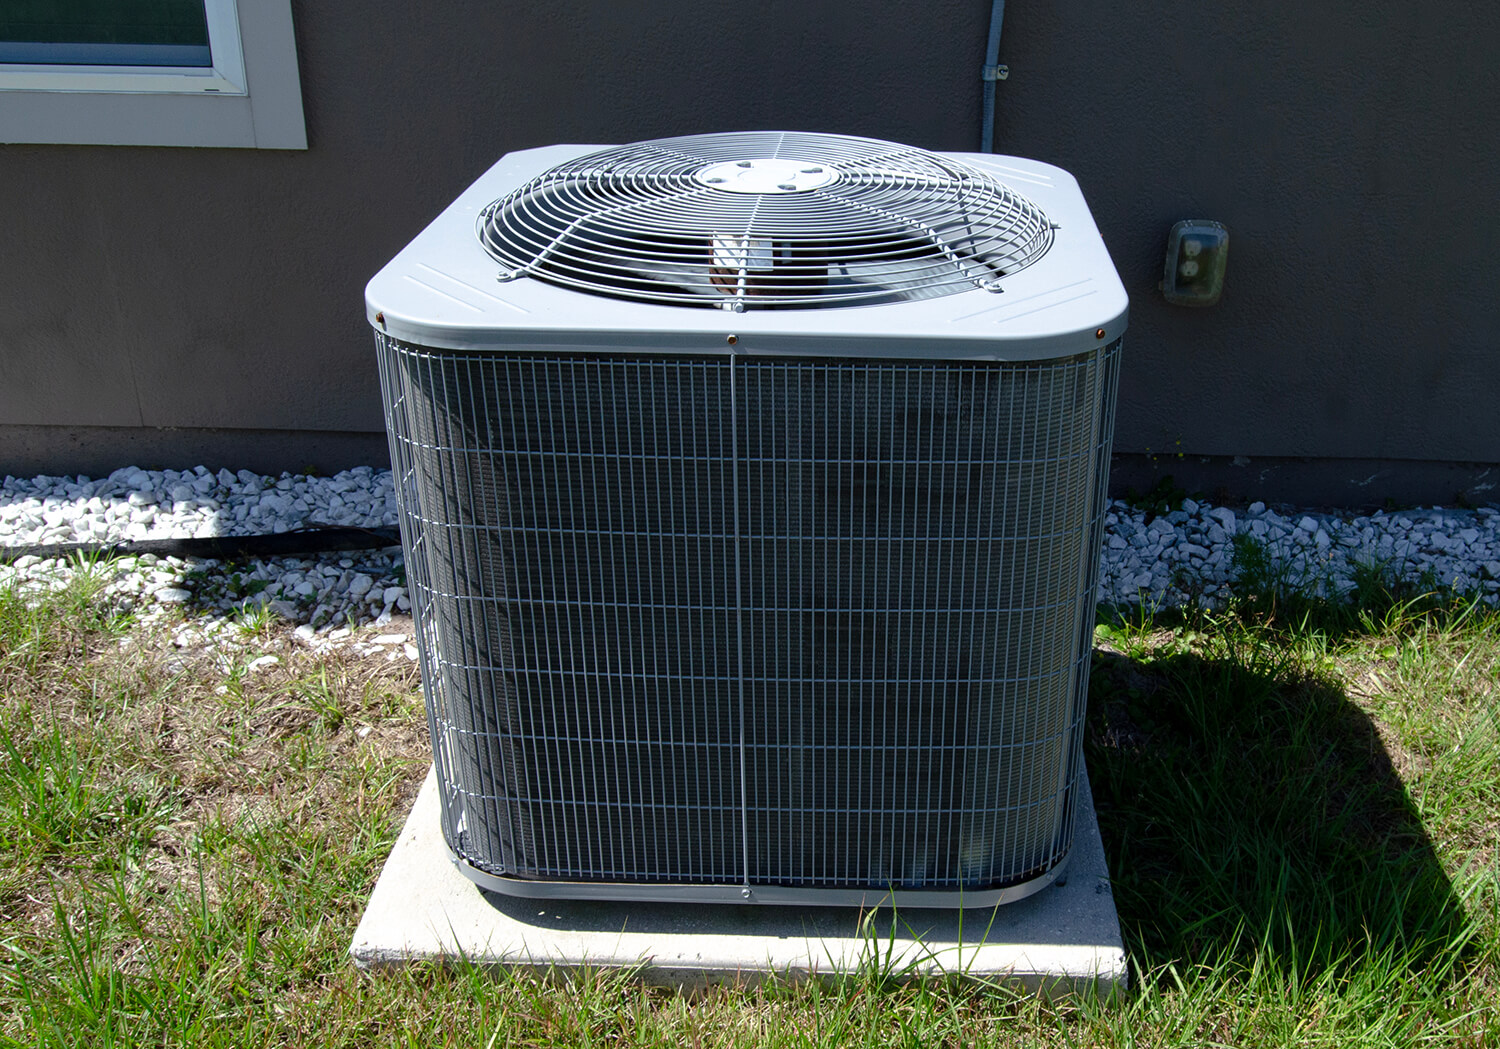 Air conditioning repairs can be affordable for everyone